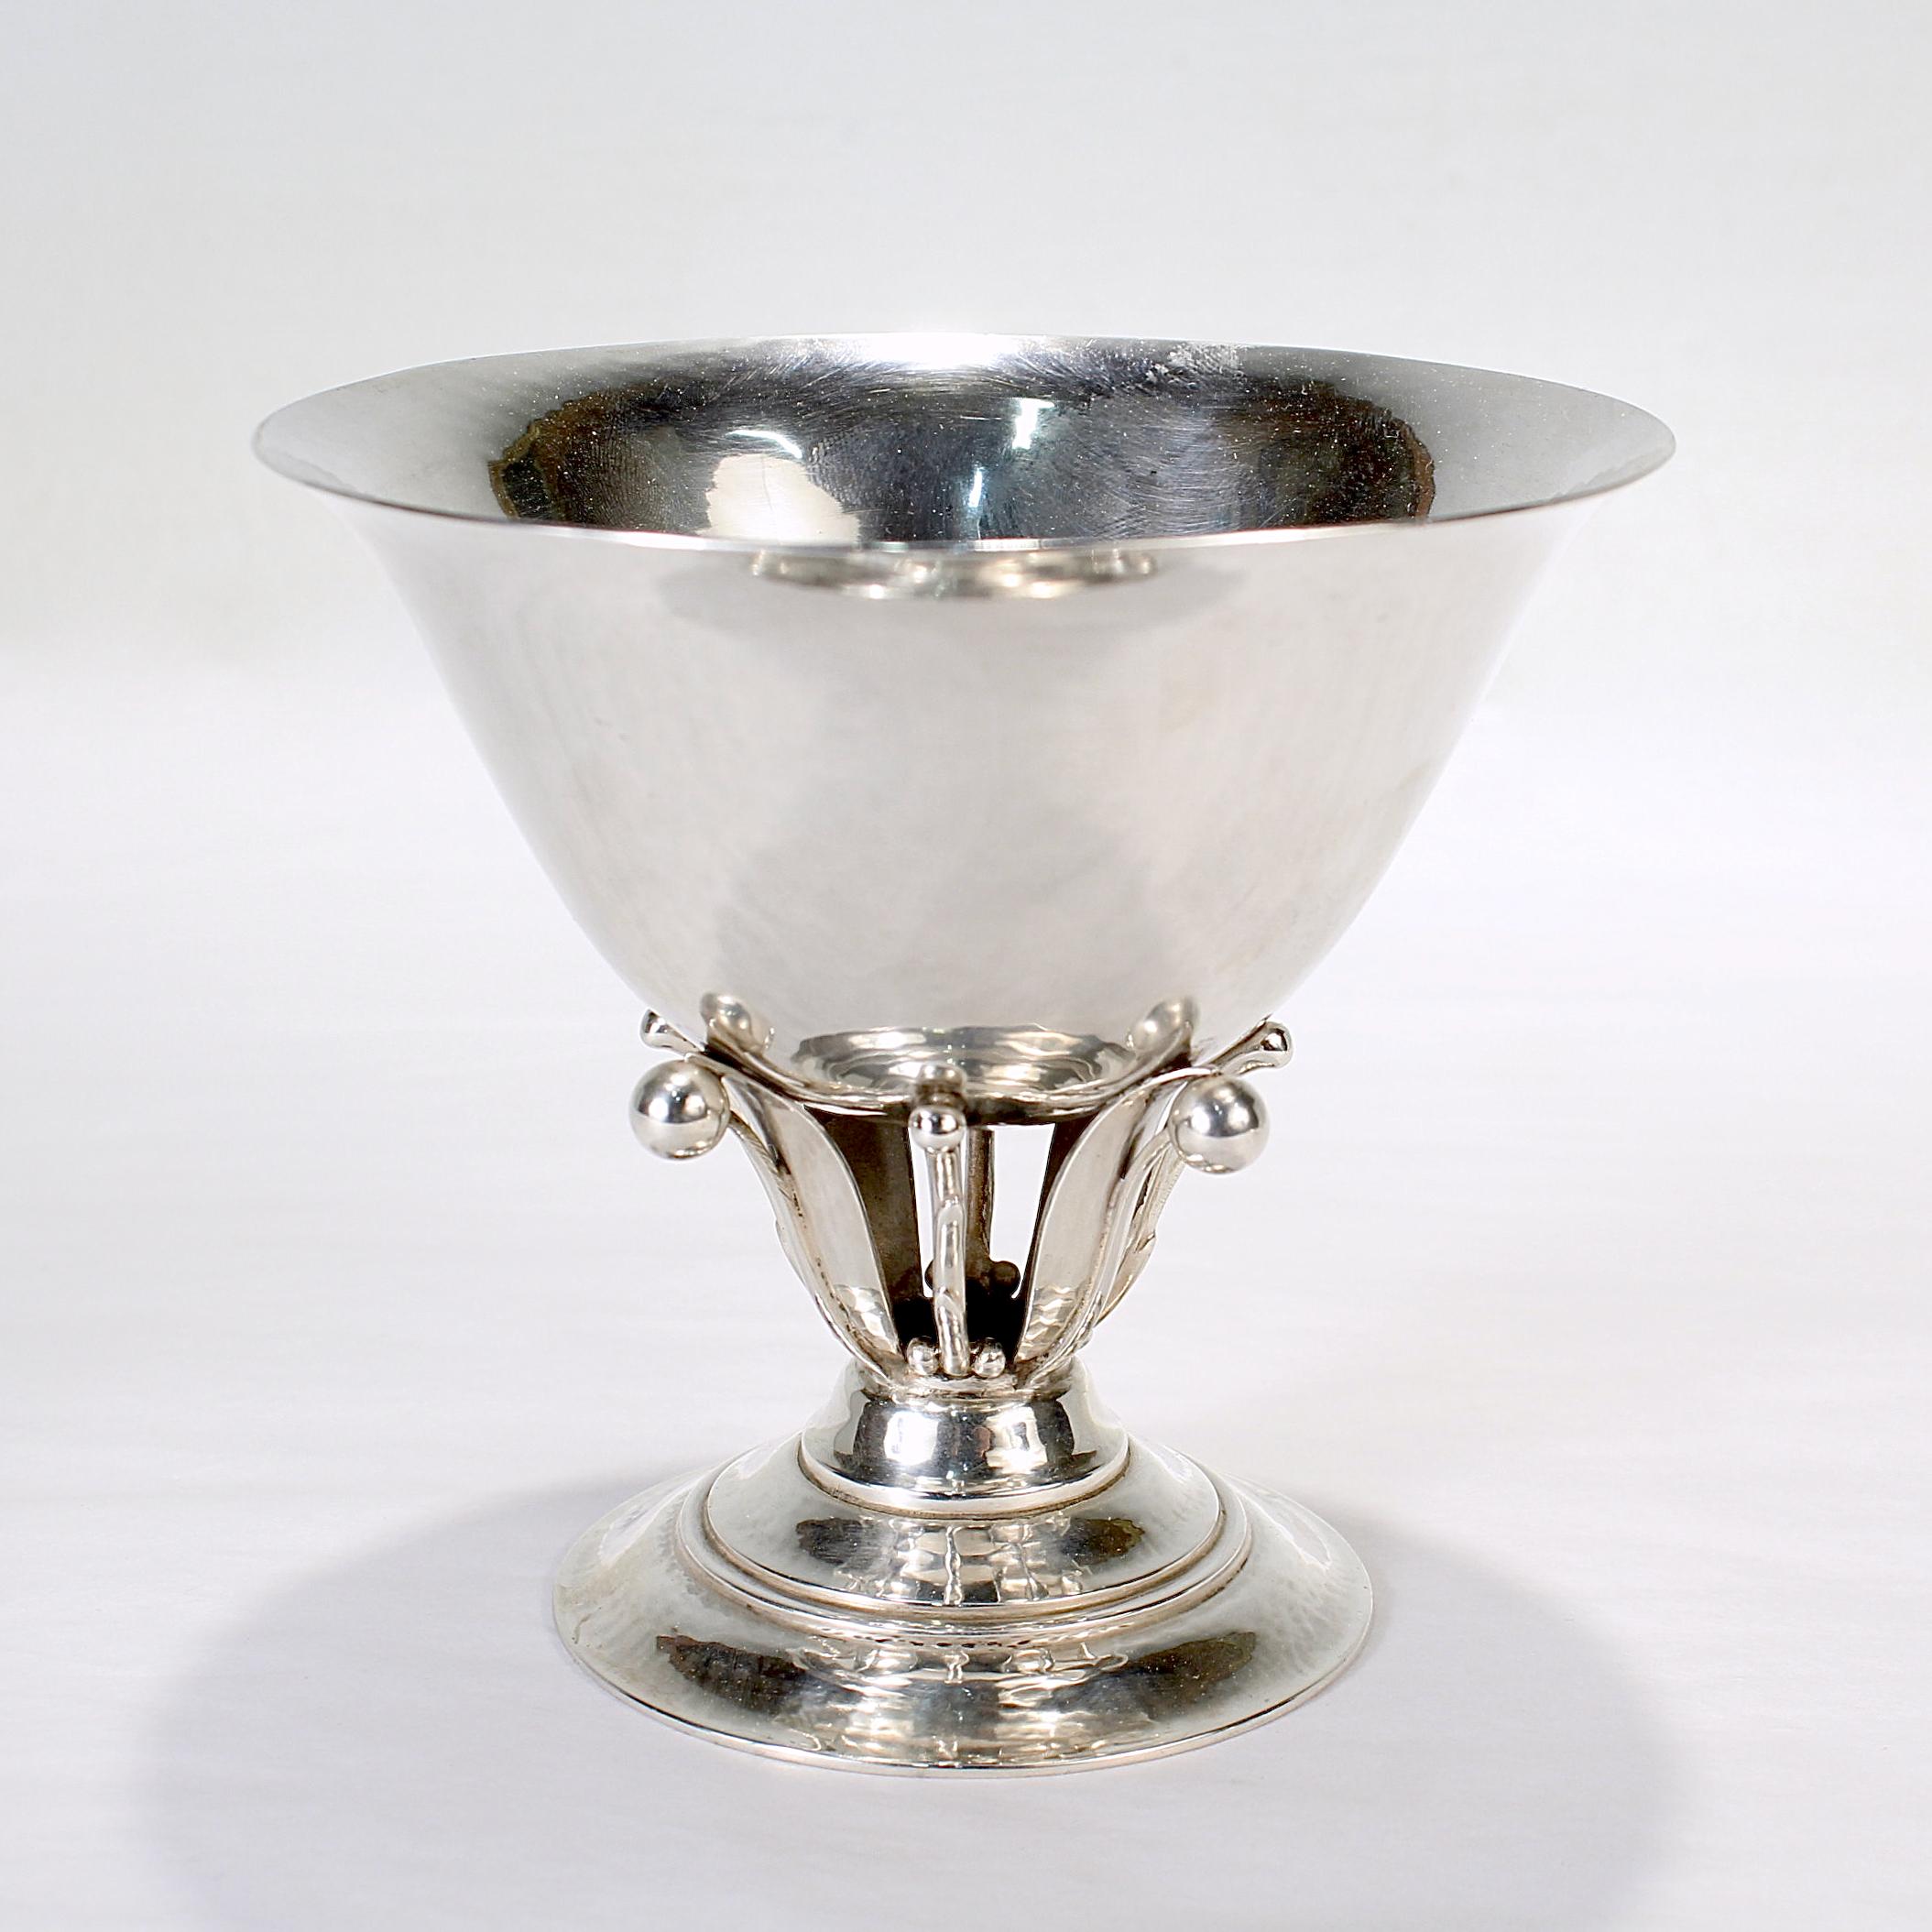 Art Deco Period Georg Jensen Sterling Silver Footed Bowl by Johan Rohde In Good Condition For Sale In Philadelphia, PA